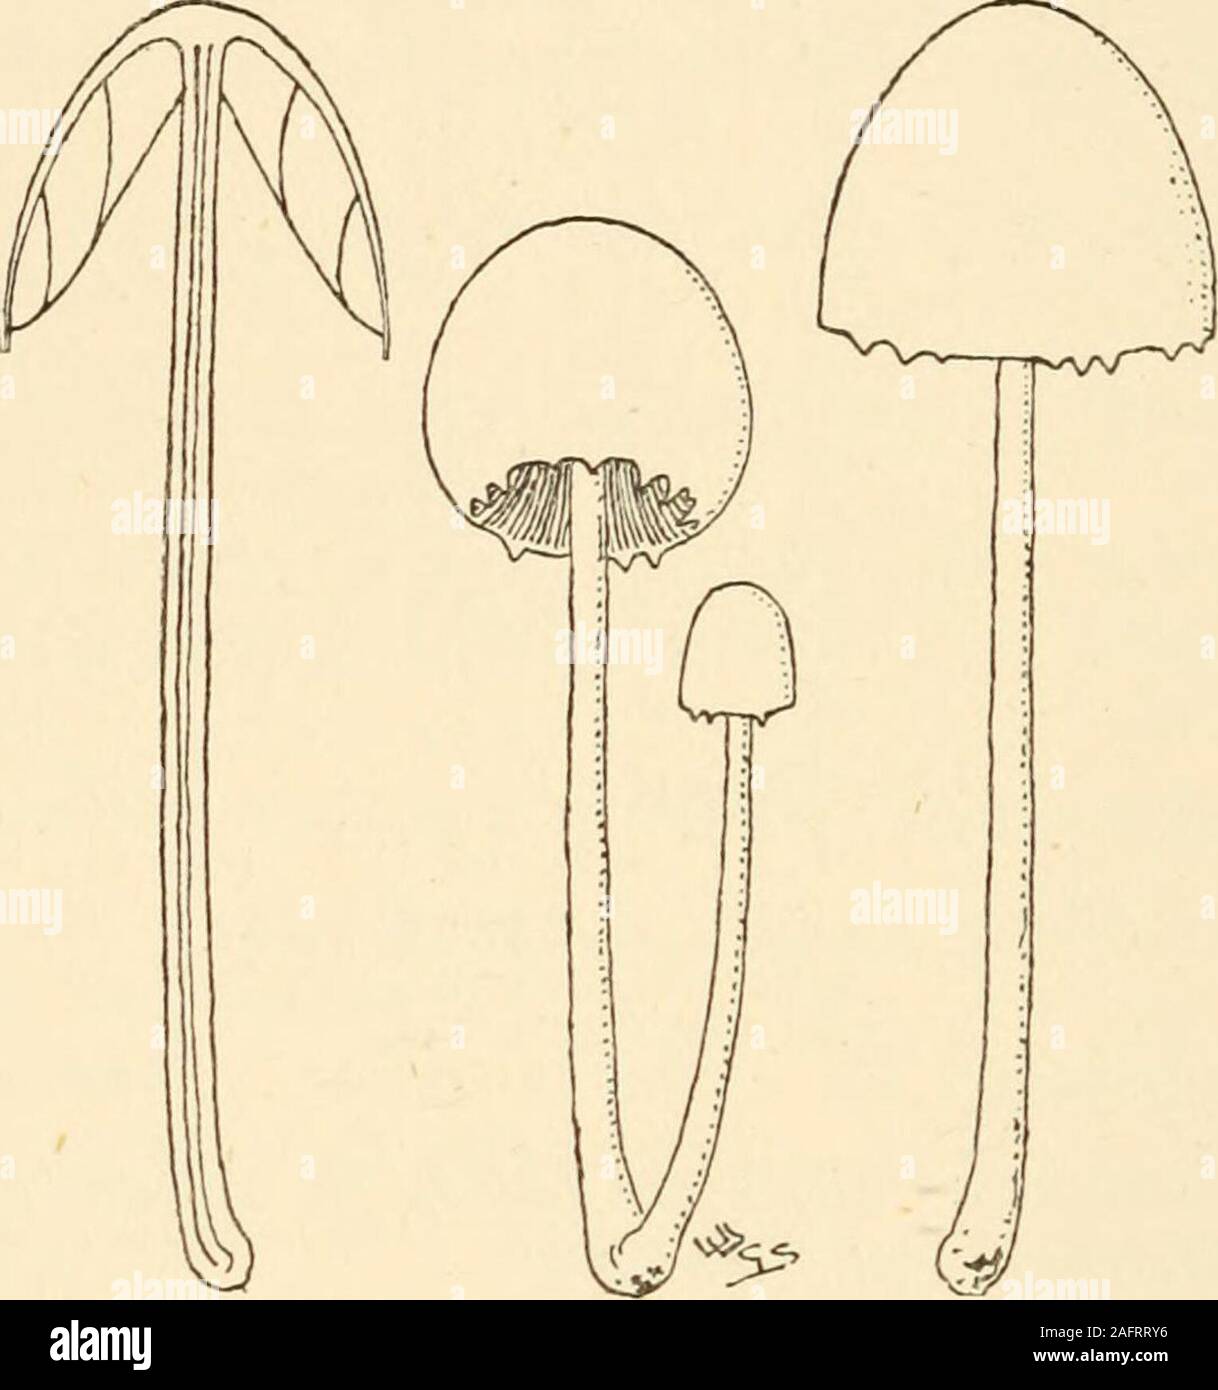 . Synopsis of the British Basidiomycetes ; a descriptive catalogue of the drawings and specimens in the Department of botany, British museum. A. below mid. G. adnexo-ascending, ashy-grey toblack. Flesh white. On cow-dung, on soil in a flower-pot, Scarborough, 1885. 3^ X 1^ X TV in. 896. A. fimiputris Karst. (from its habitat, rotten dung ; fimus, dung, putris, rotten) a b c.P. innato-silky, pale umber to dark lead-colour; marg. appen-diculate with white V. St. colour as P., umber below. A.superior, small, imperfect. G. adfixo-ascending. Solitary, rarely coespitose. Taste insipid. Fields, garde Stock Photo